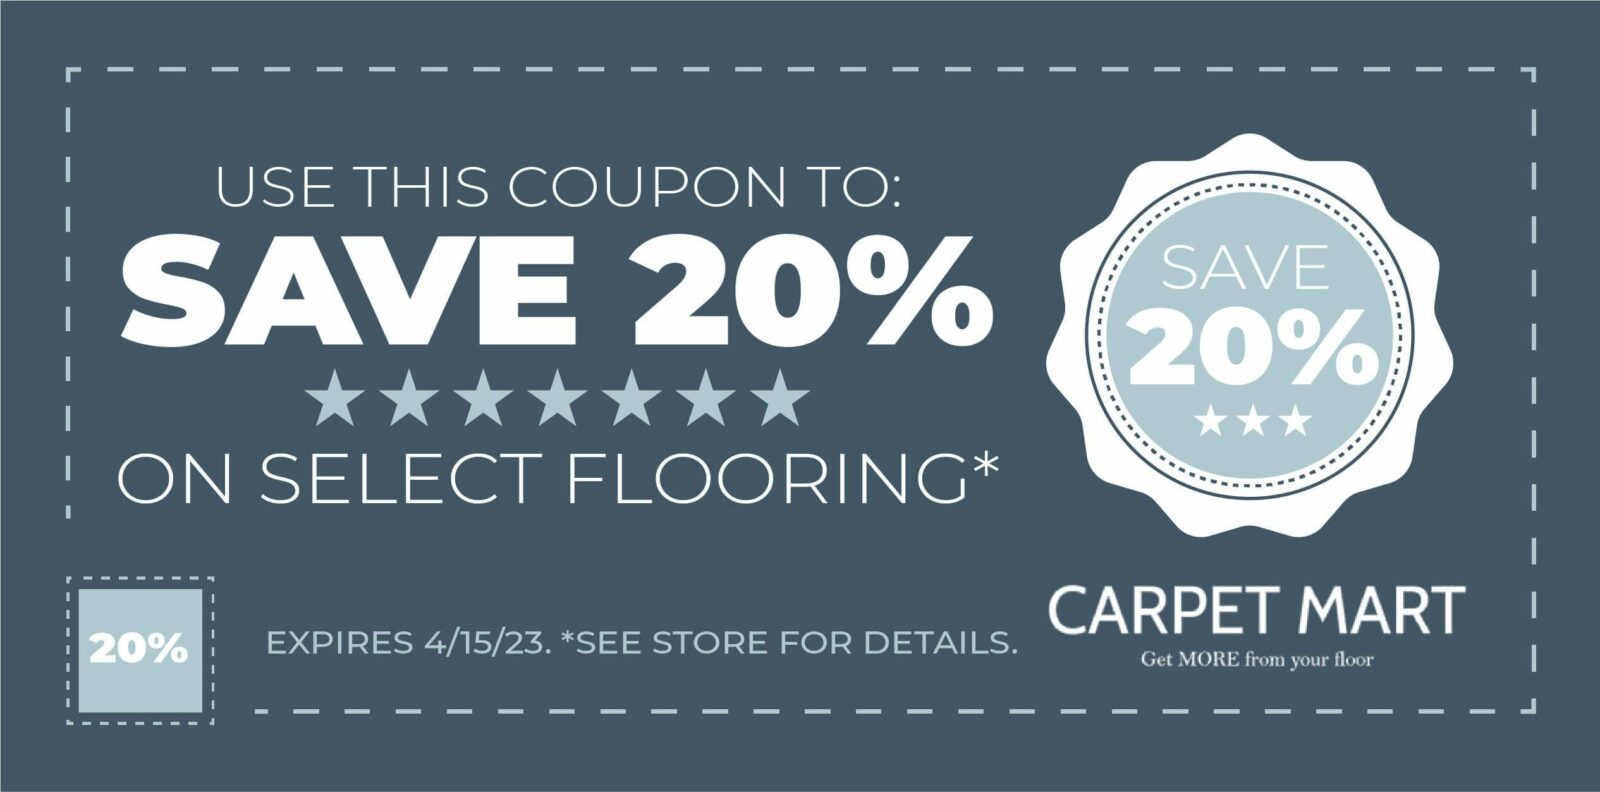 Use this coupon to save 20% on select flooring | Carpet Mart